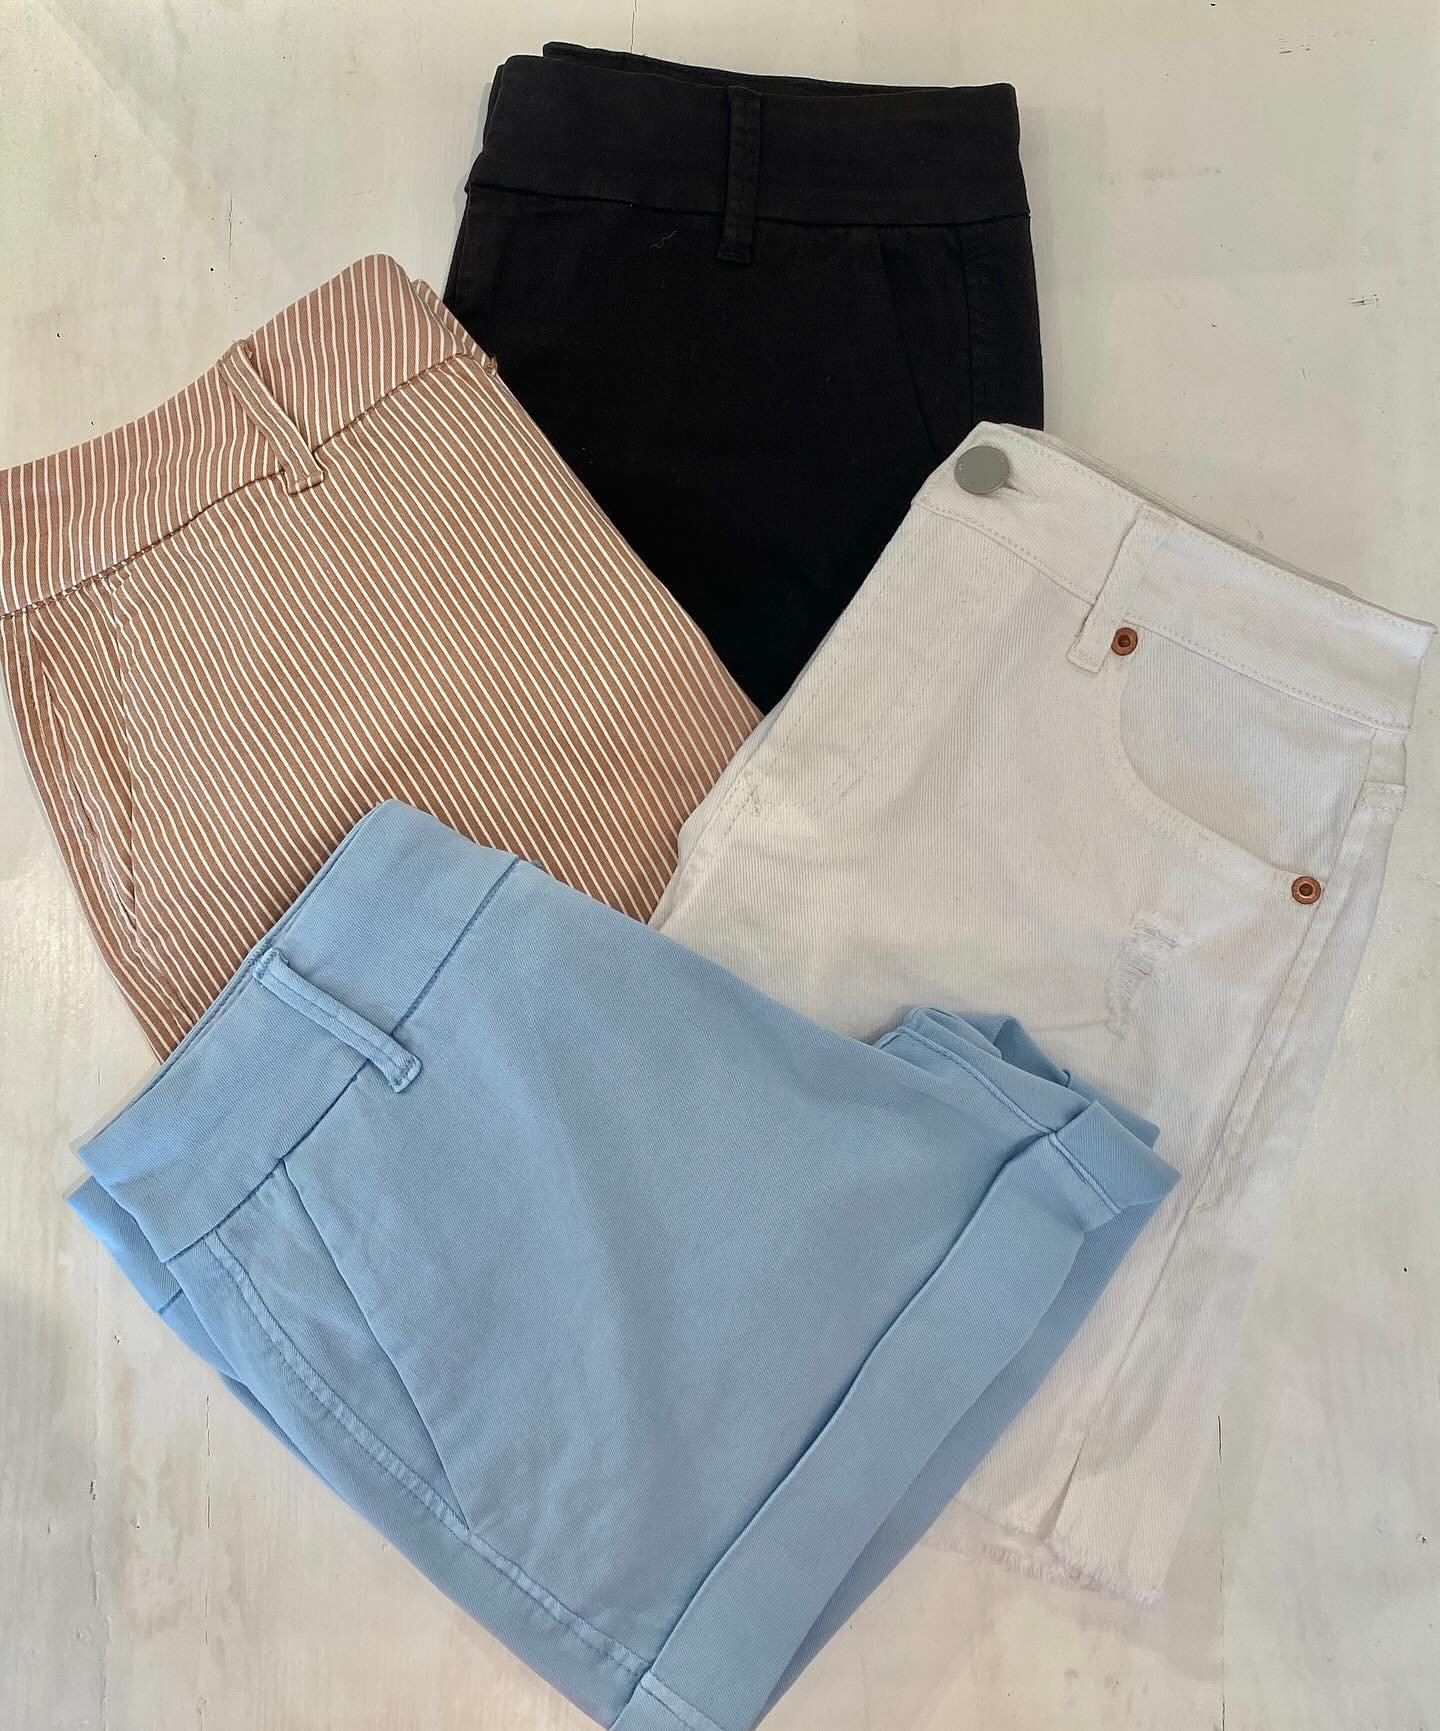 Your favorite shorts have arrived! Fun stripe and stretch denim! 😍
&bull;
&bull;
&bull;
&bull;
&bull;

#islandlife #soulhouse #soulhousekeywest
#shoplocal #retailkeywest #retail  #creative #homegoods #apparel 
#supportlocalbusiness
#keywestshopping 